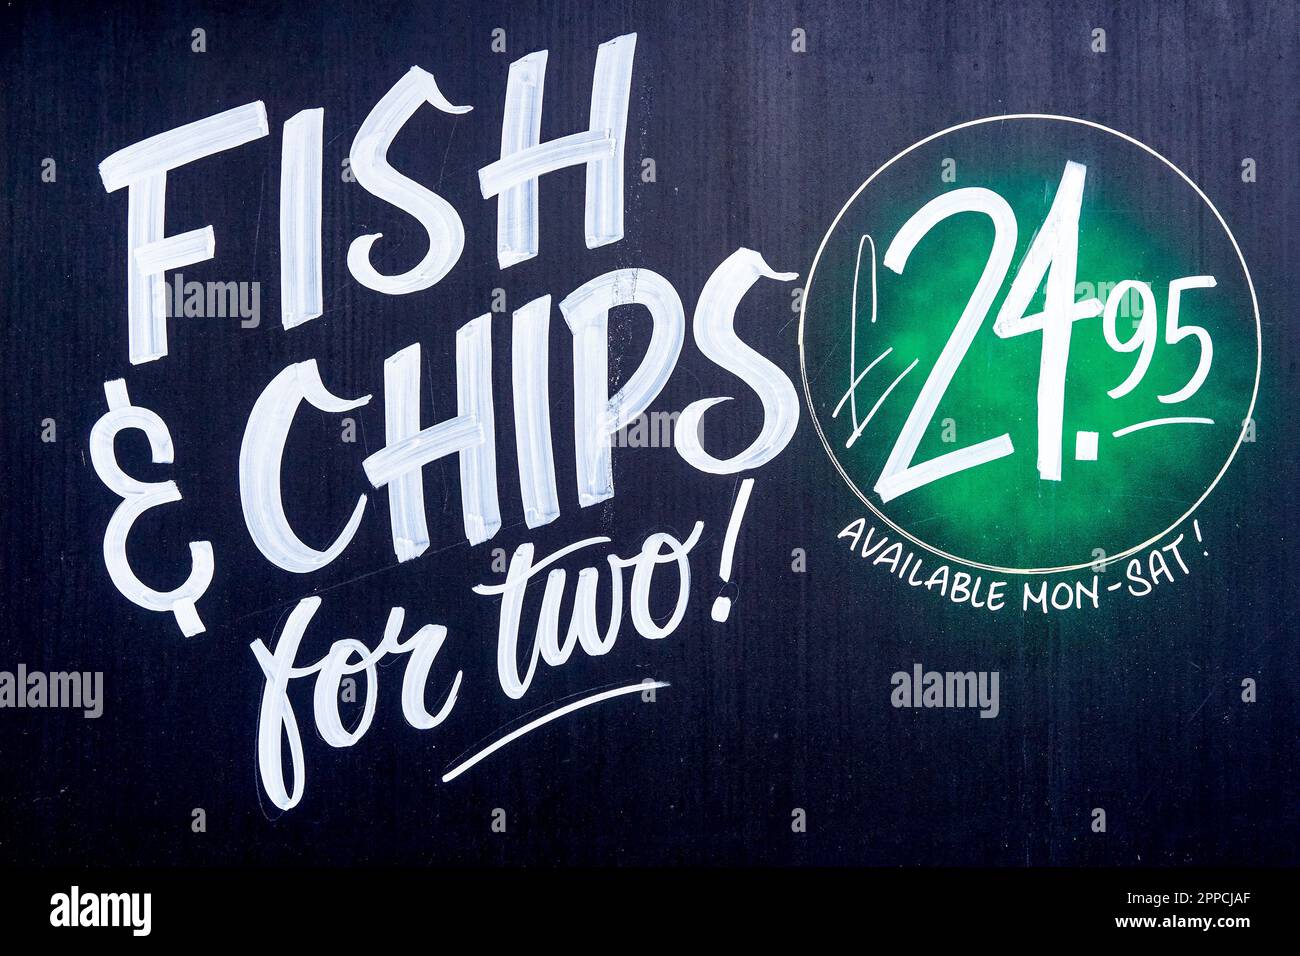 Advert for traditional British fish and chips meal deal for two with price Stock Photo